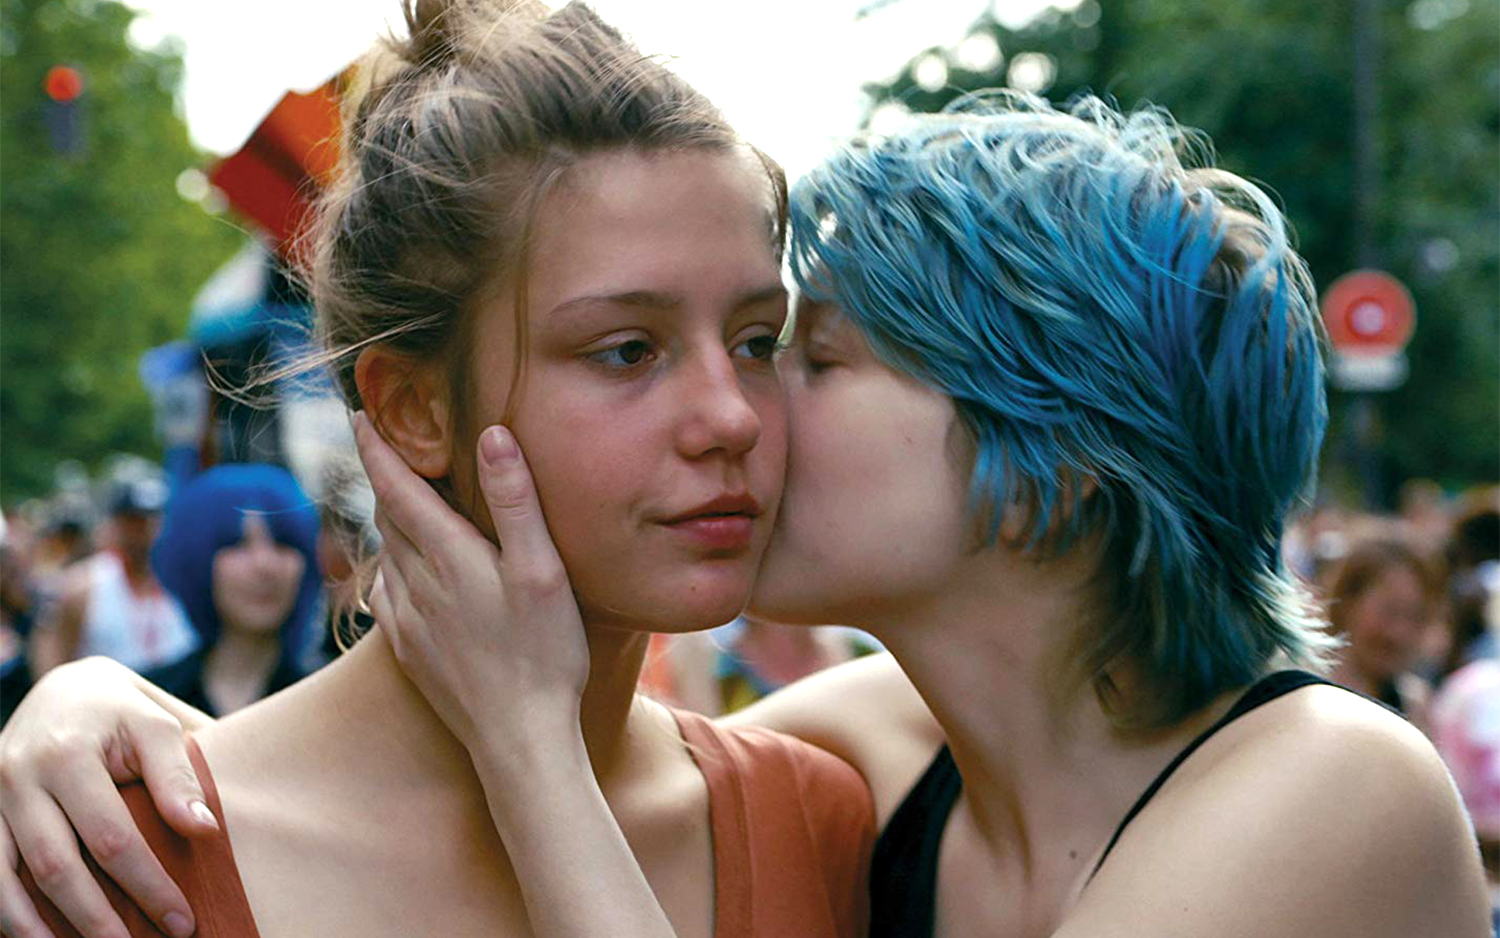 Movies to watch during Pride: Blue Is the Warmest Color